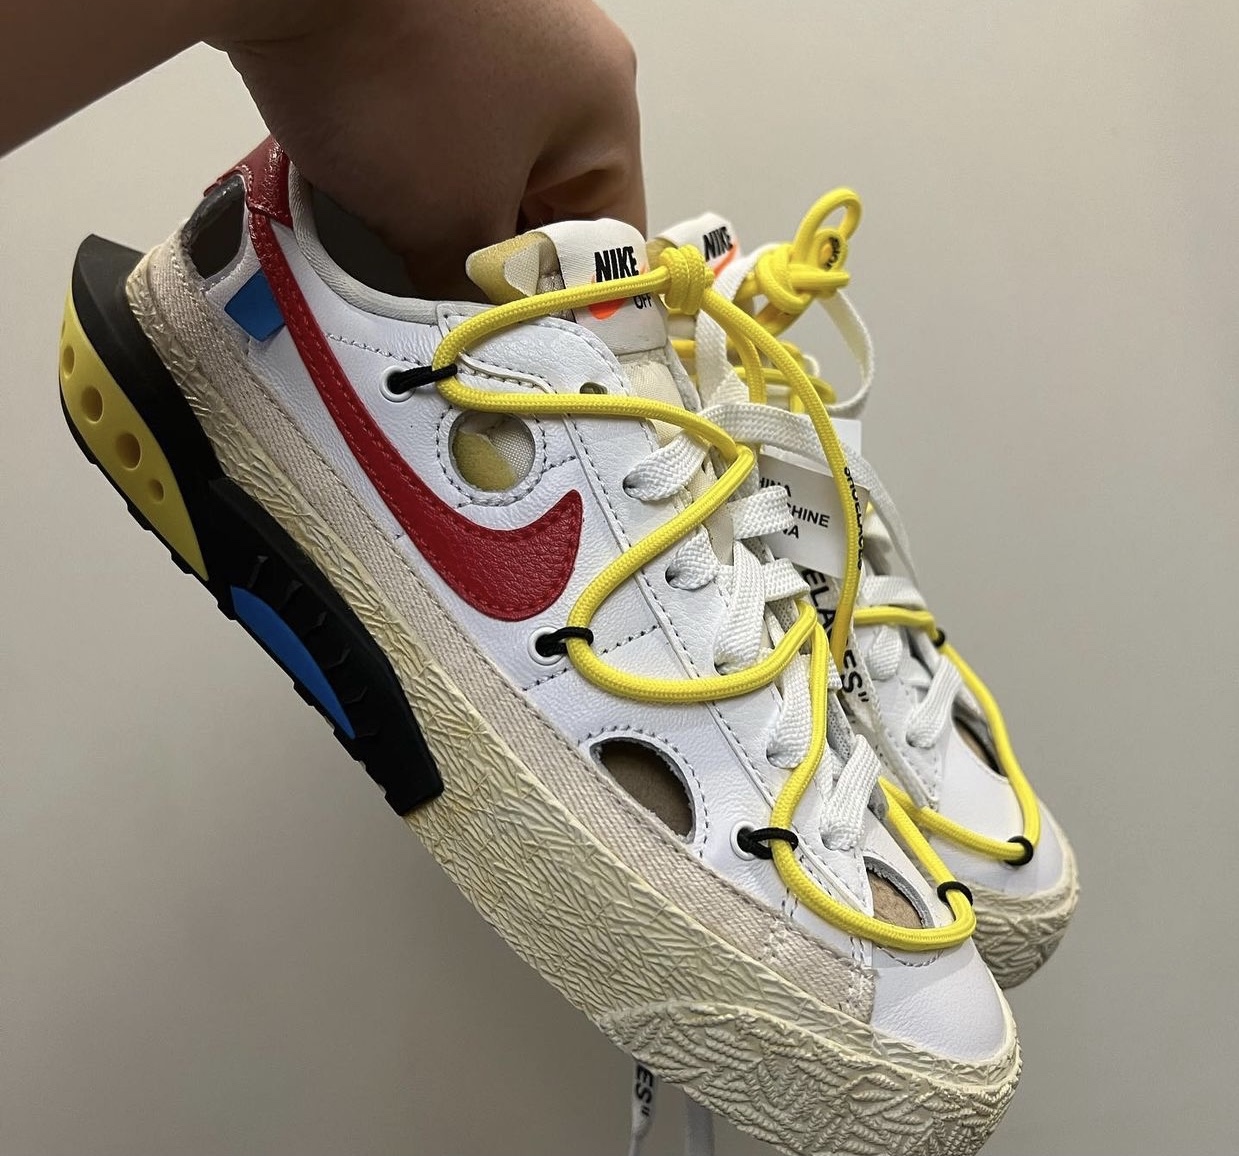 Off-White x Nike Blazer Low White University Red DH7863-100 Release Date